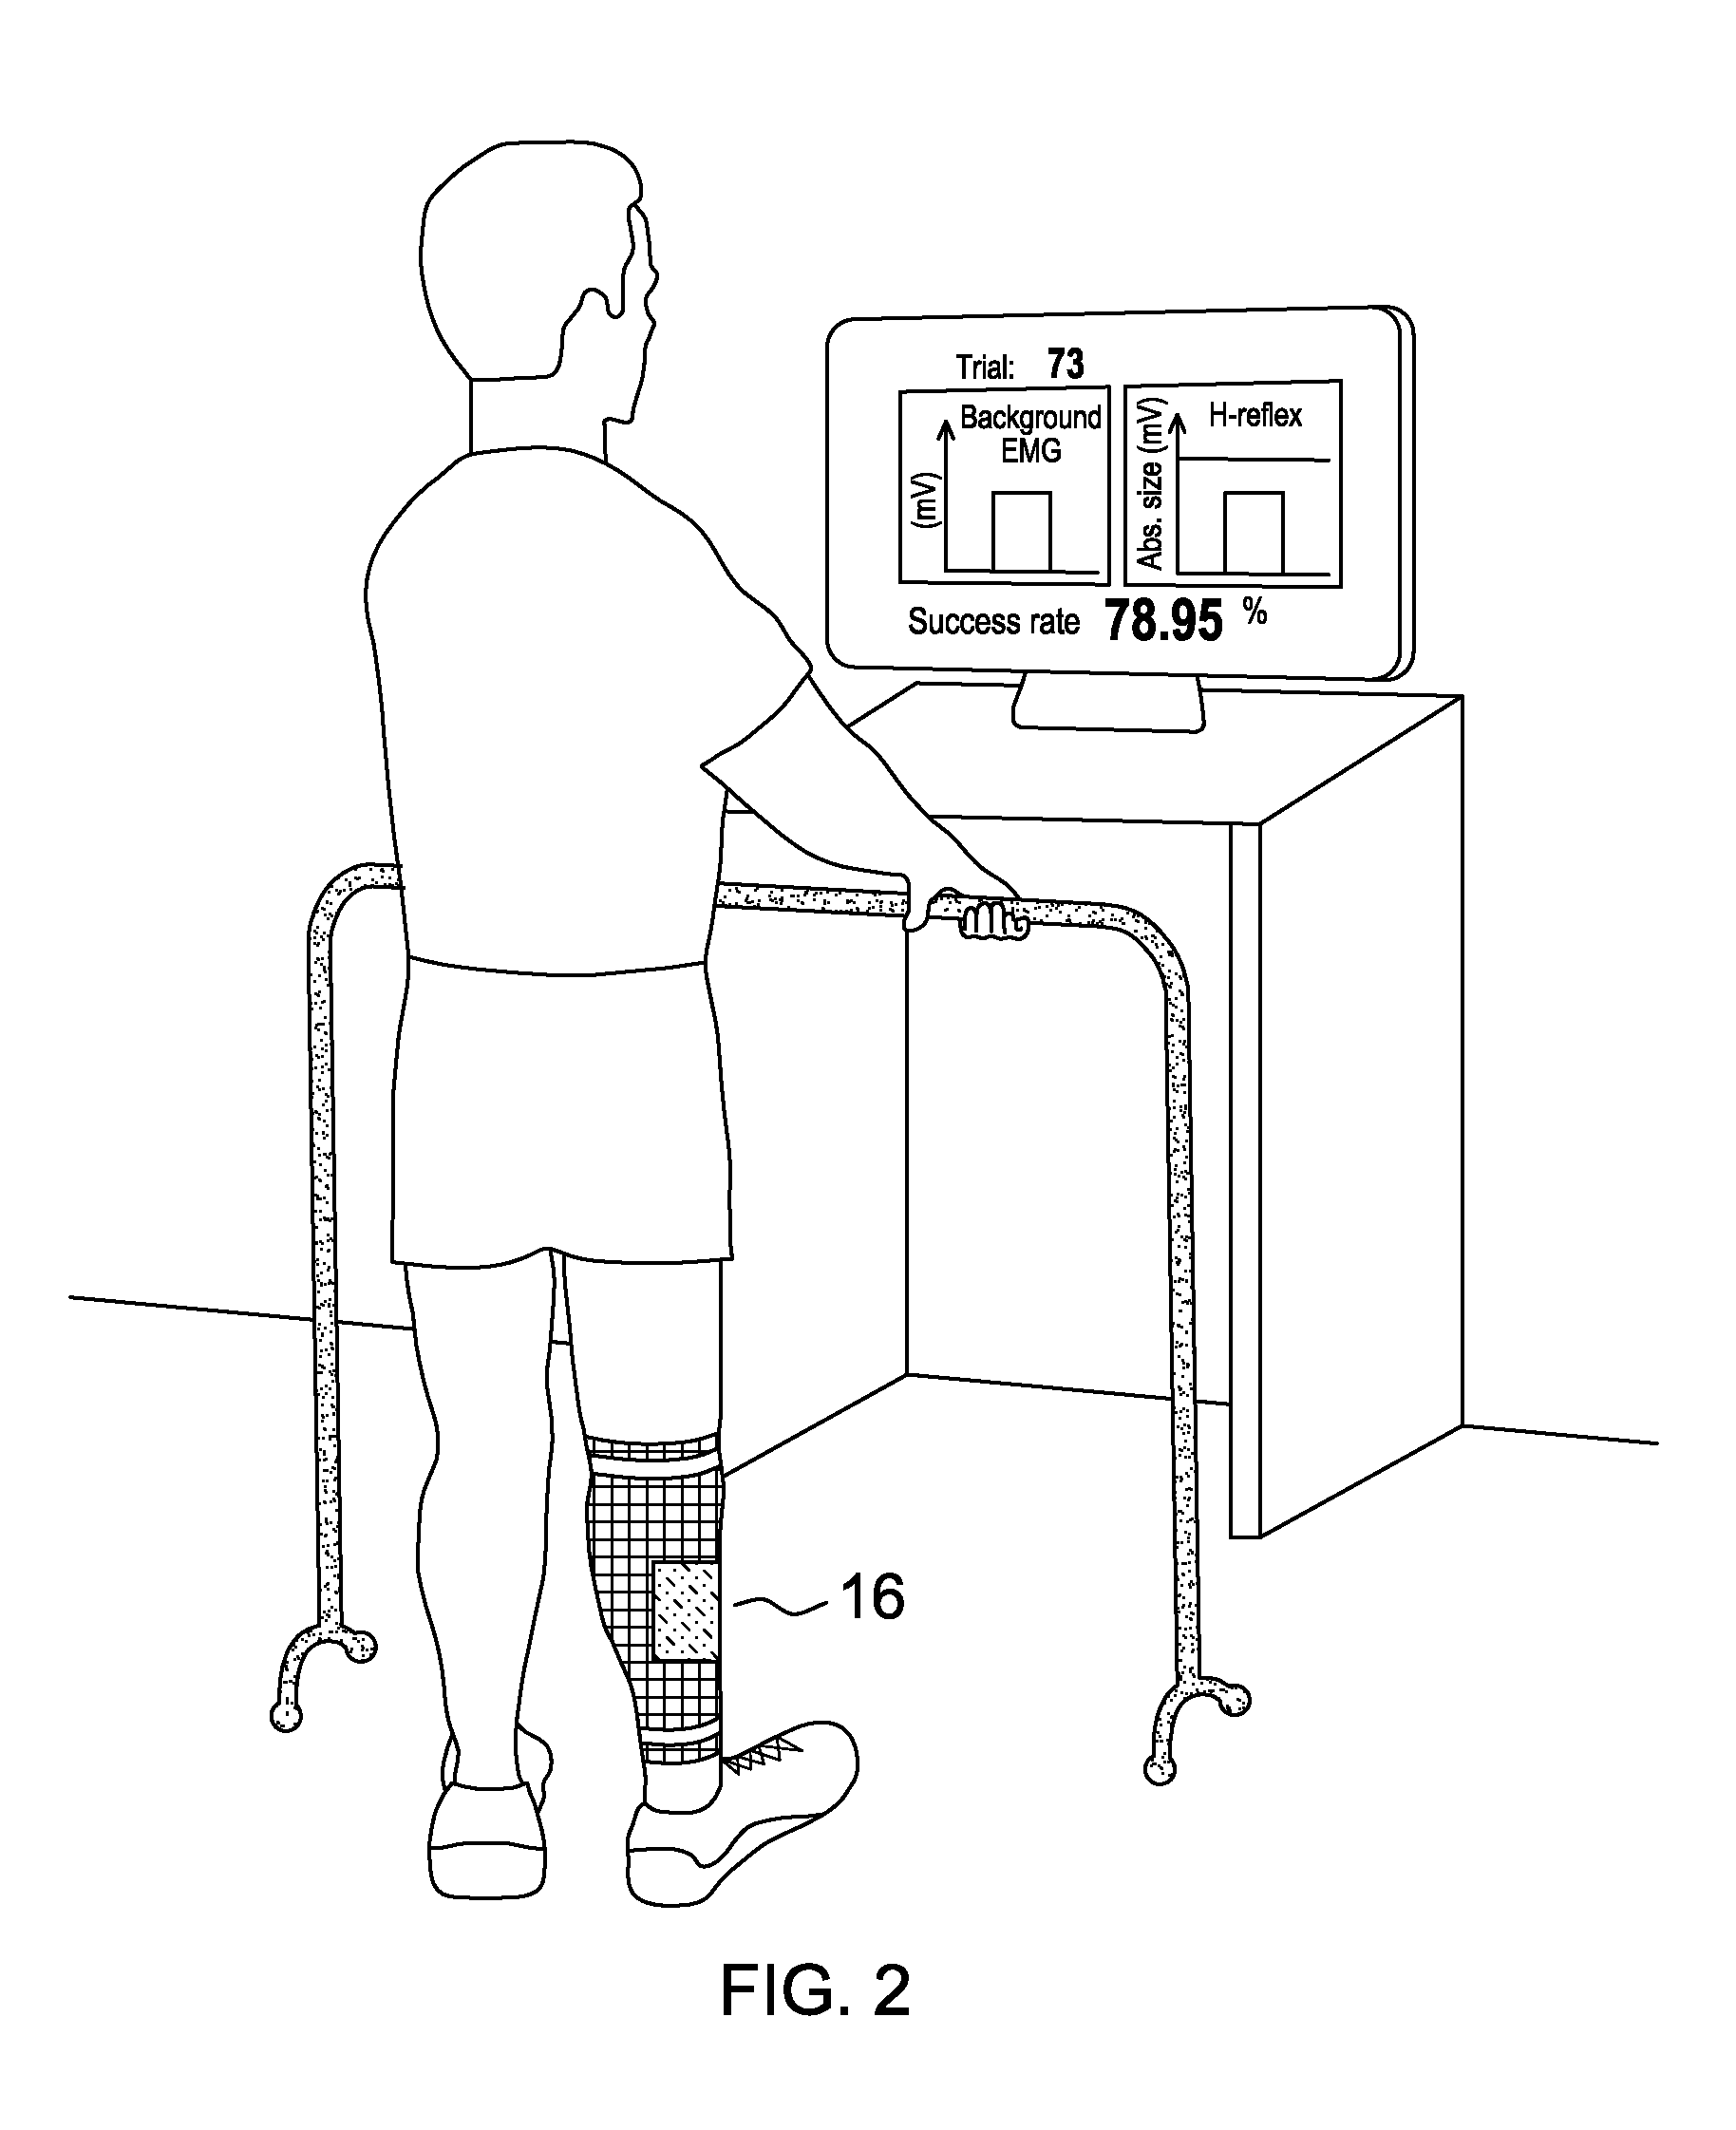 Method and device to restore and/or improve nervous system functions by modifying specific nervous system pathways